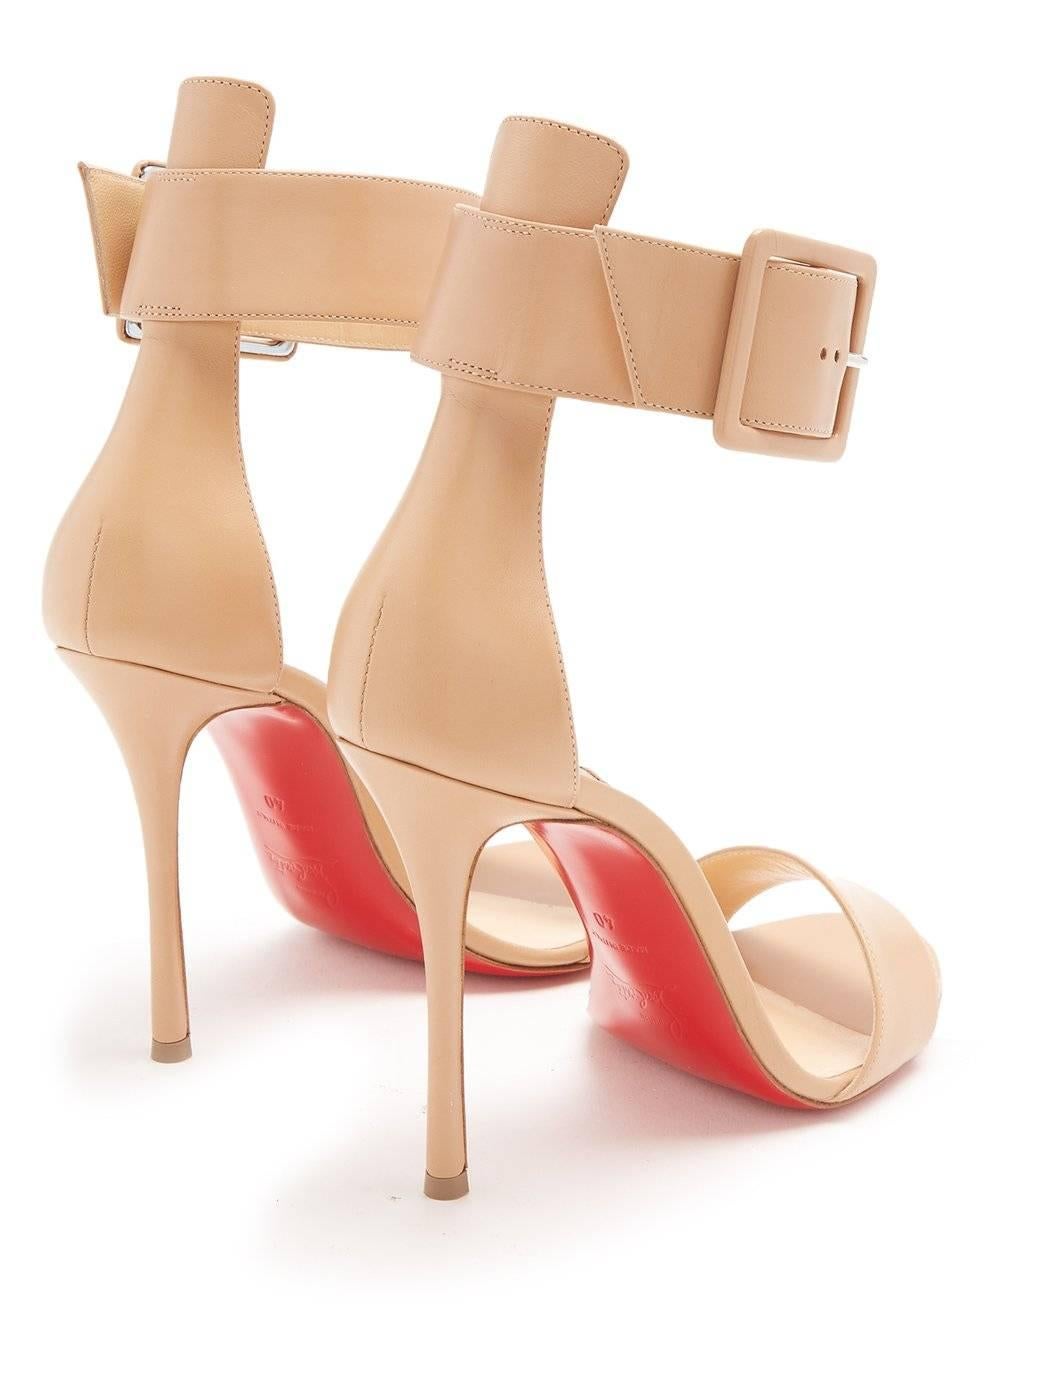 Christian Louboutin New Nude Leather Buckle Evening Sandals Heels  1